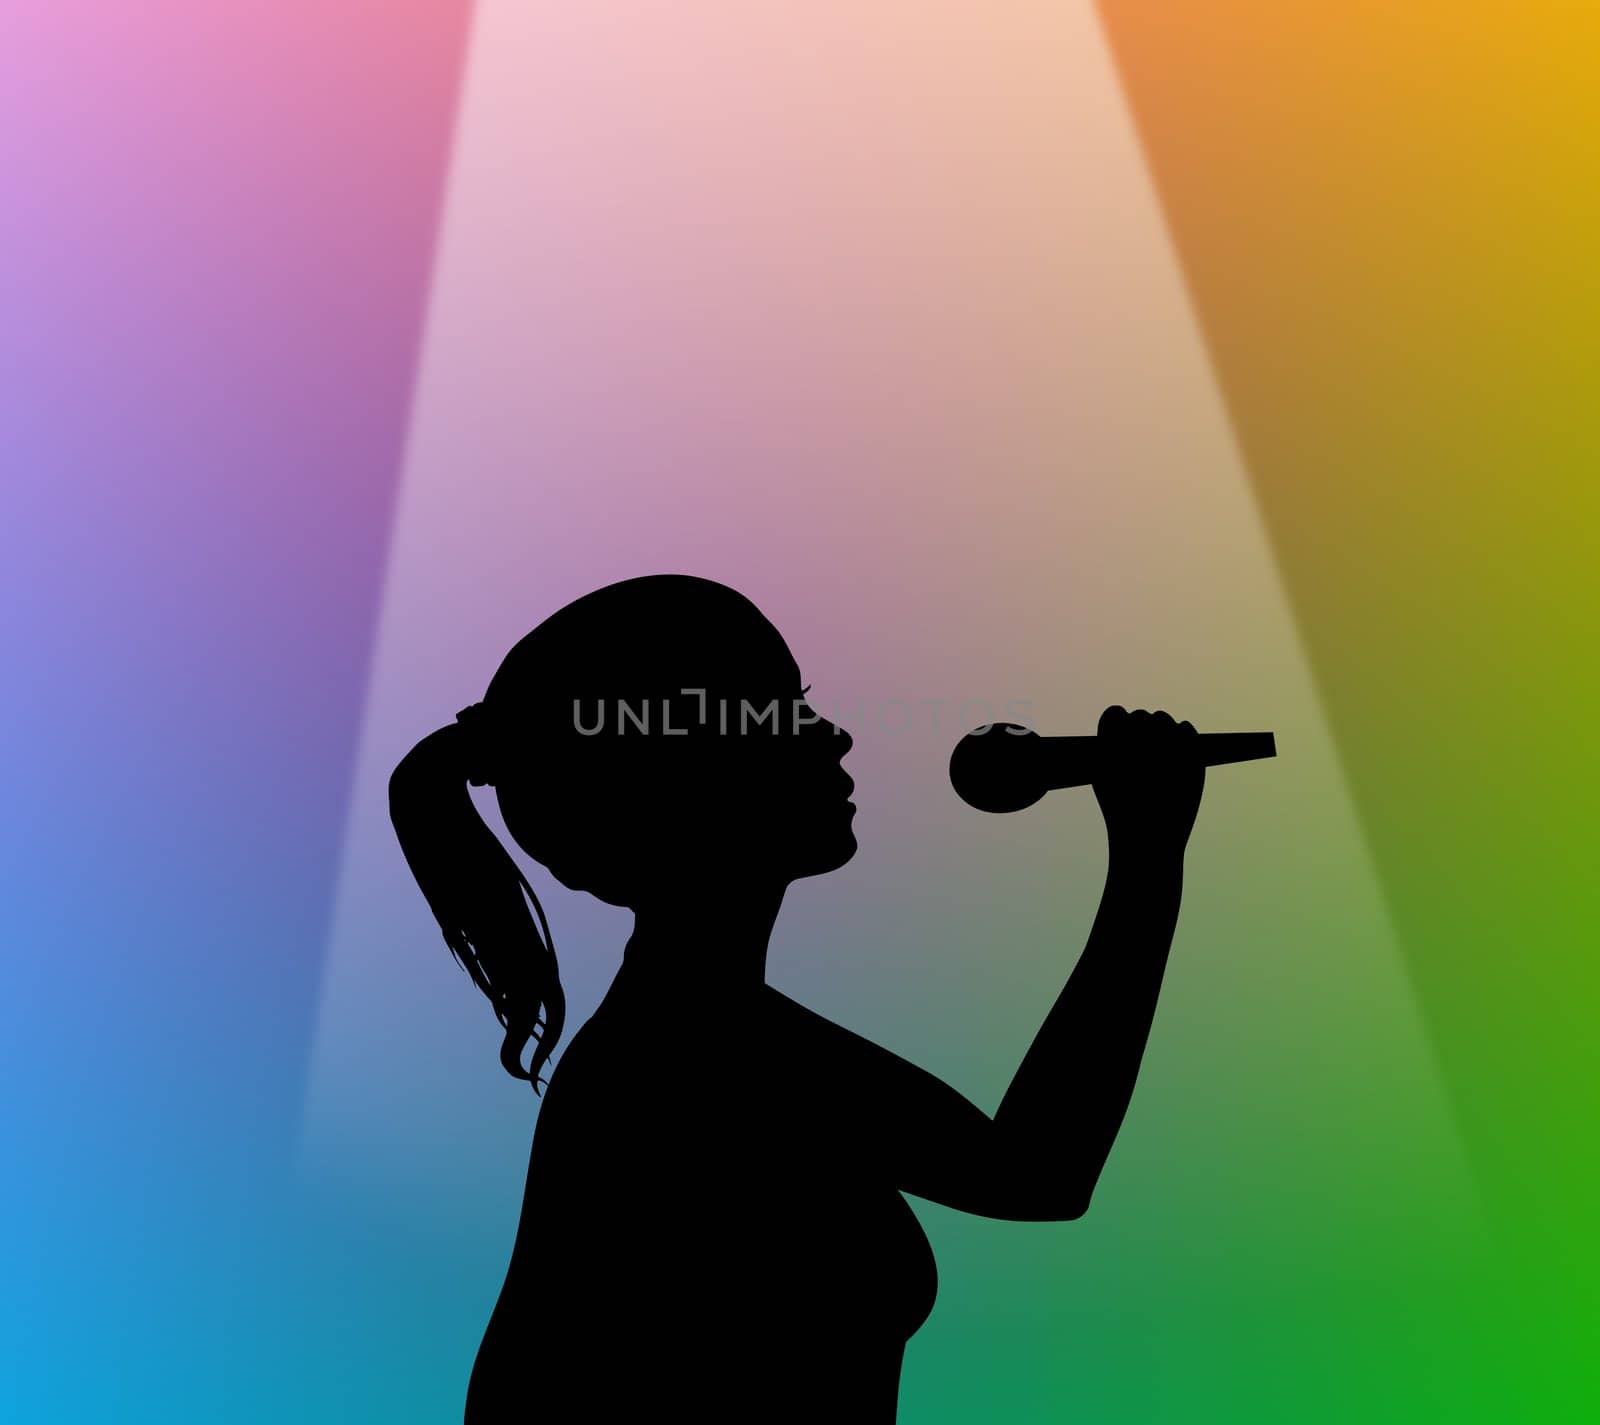 Illustration of a silhouette girl holding a microphone under a spotlight